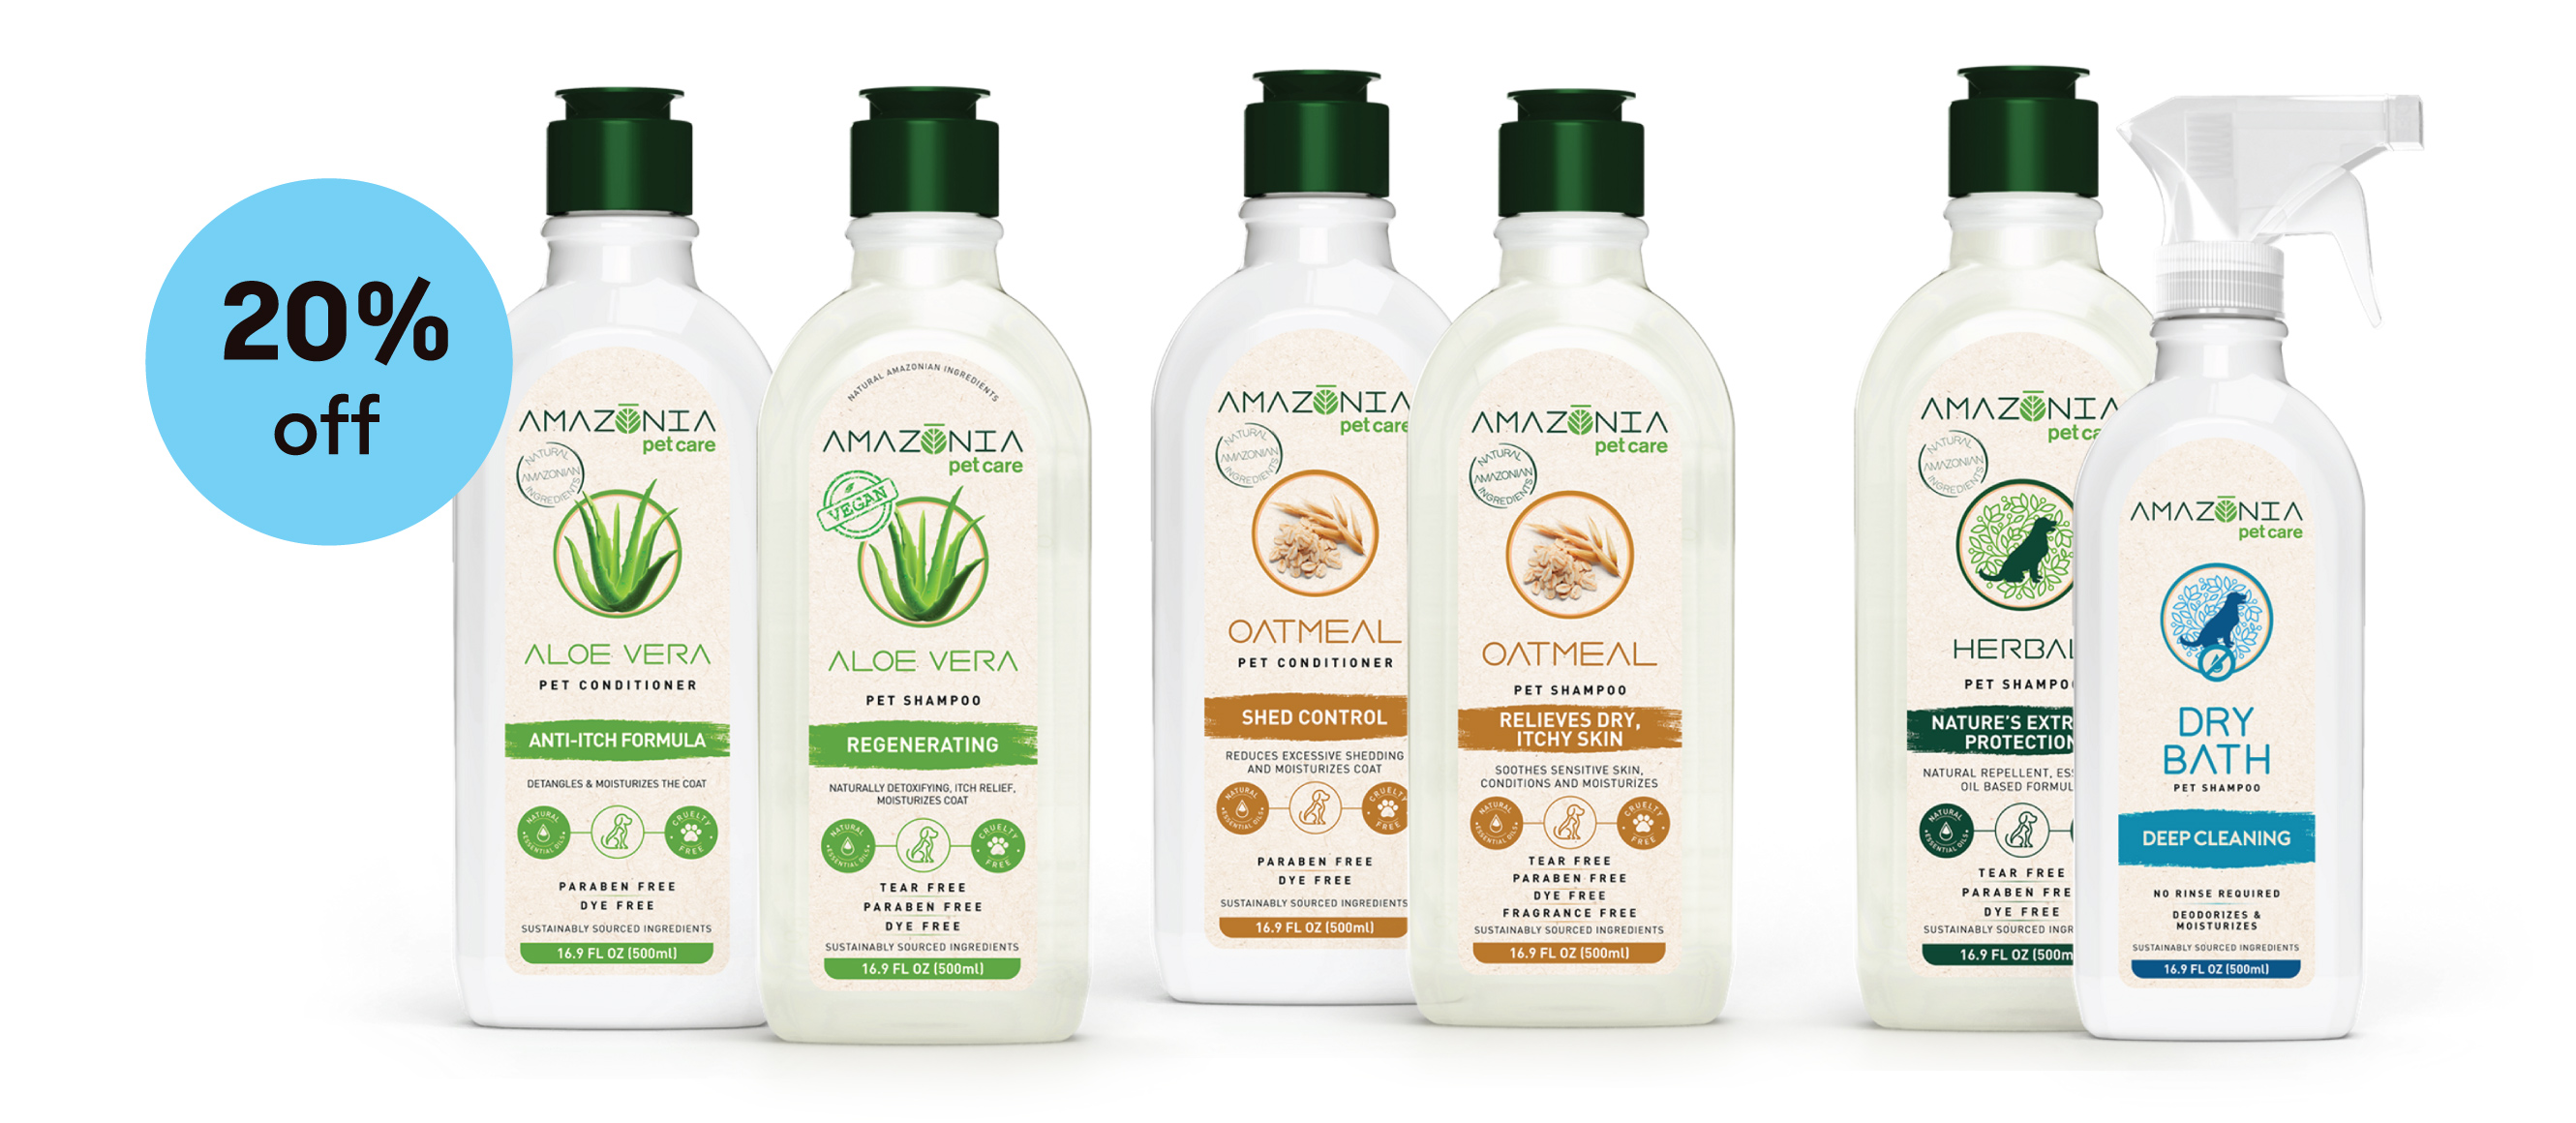  !, AMAZHNIA i ALOE VERA PET CONDITIONER ANTI-ITCH FORMULA DETANGLES MOISTURIZES THE COAT PARABEN FREE DYE FREE SUSTAINABLY SOURCED INGREDIENTS 16.9 FL 0Z 500ml AMAZYNIA : petcare , ALOE VERA PET SHAMPOO REGENERATING NATURALLY DETONIFYING, ITCH RELIEF, MOISTURIZES COAT TEAR FREE PARABEN FREE DYE FREE SUSTAINABLY SOURCED INGREDIENTS 16.9 FL 0Z 500m1 1 AMAZYNIA j petcare OATMEAL PET CONDITIONER SHED CONTRO REDUCES EXCESSIVE SHEDDING AND MOISTURIZES COAT PARABEN FREE DYE FREE SUSTAINABLY SOURCED INGREDIENTS 16.9 FL 0Z 500mU AMAZHNIA R petcare oreo OATMEAL PET SHAMPOO RELIEVES DRY, - L SOOTHES SENSITIVE SKIN, CONDITIONS AND MOISTURIZES TEAR FREE PARABEN FREE OYE FREE FRAGRANCE FREE SUSTAINABLY SOURCED INGREDIENTS 16.9 FL 0Z 500ml N AMAZYNIA petcare HERDBAI PET SHAMPO L BATH NATURAL REPELLENT. ES: OIL BASED FORMUL PET SHAMPOO DEEP CLEANING TEAR FREE PARABEN FRE NO RINSE REGUIRED DYE FREE DEODORIZES SUSTAINABLY SOURCED INGR MOISTURIZES T SUSTAINABLY SOURCED INGREDIENTS. G 